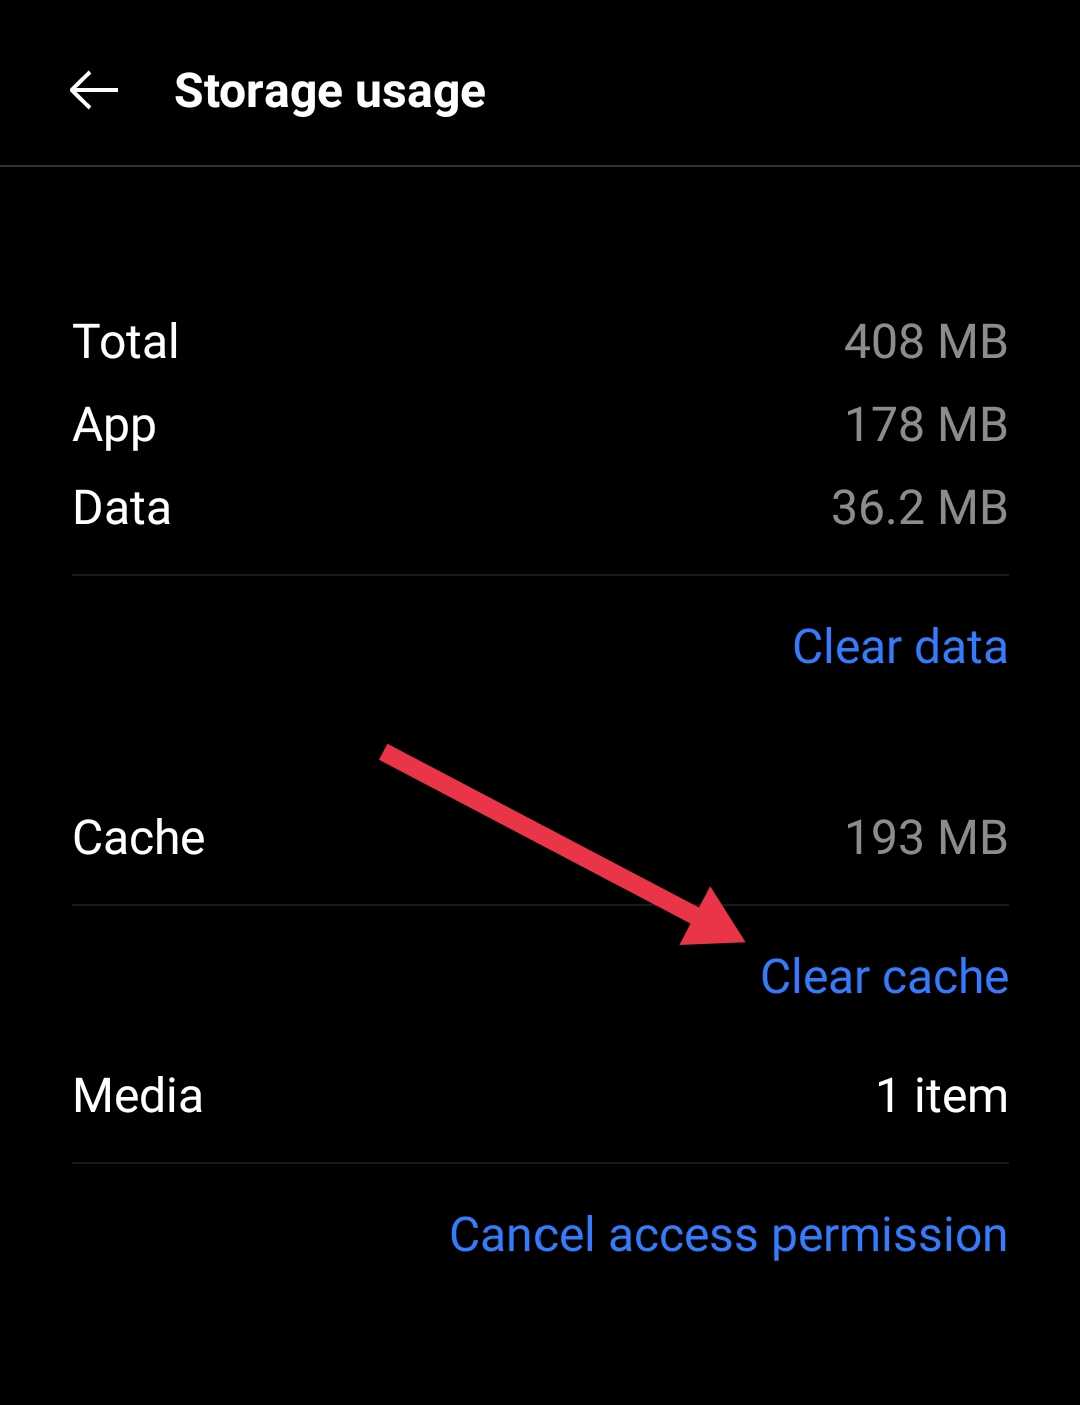 Clear cache on Android